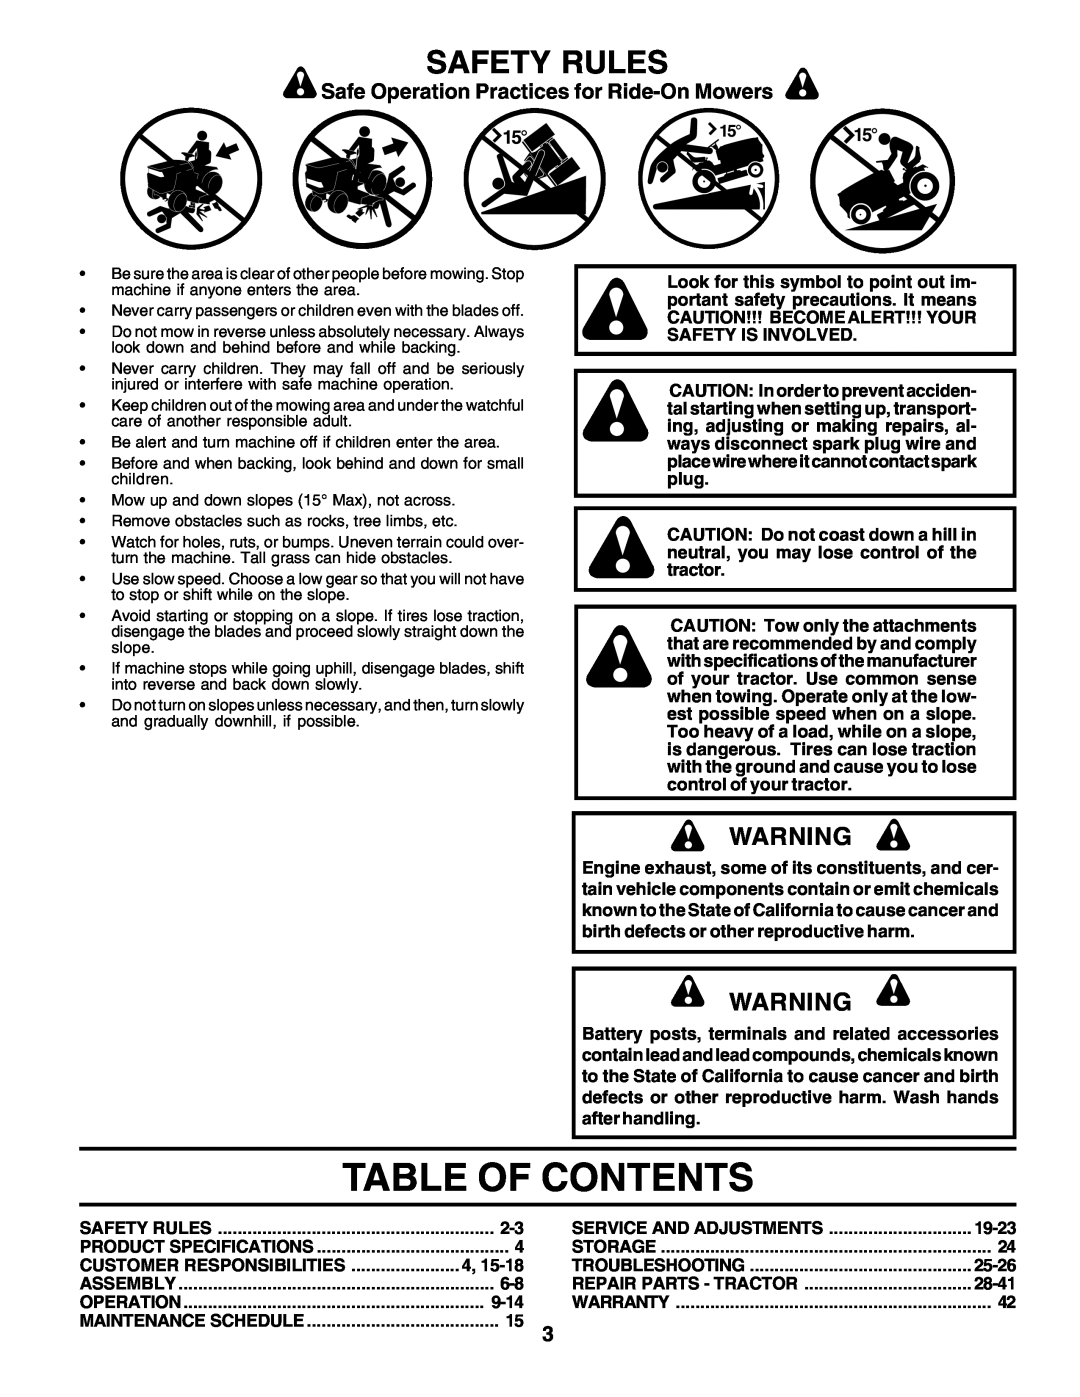 Weed Eater 178704 Table Of Contents, Safety Rules, Safe Operation Practices for Ride-On Mowers, Product Specifications 